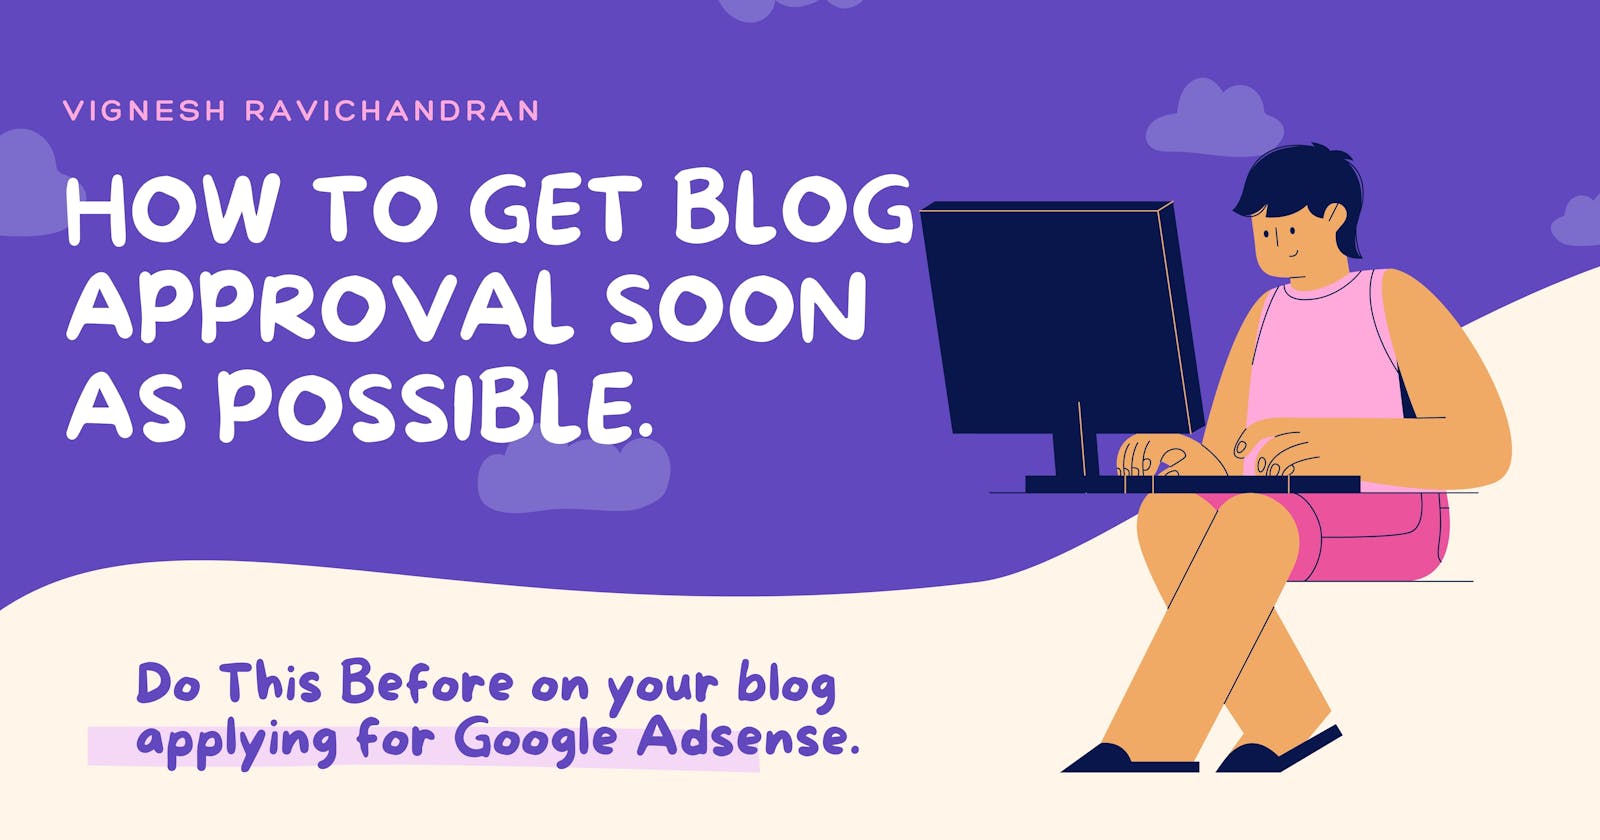 How To Get Blog Approval Soon as Possible.